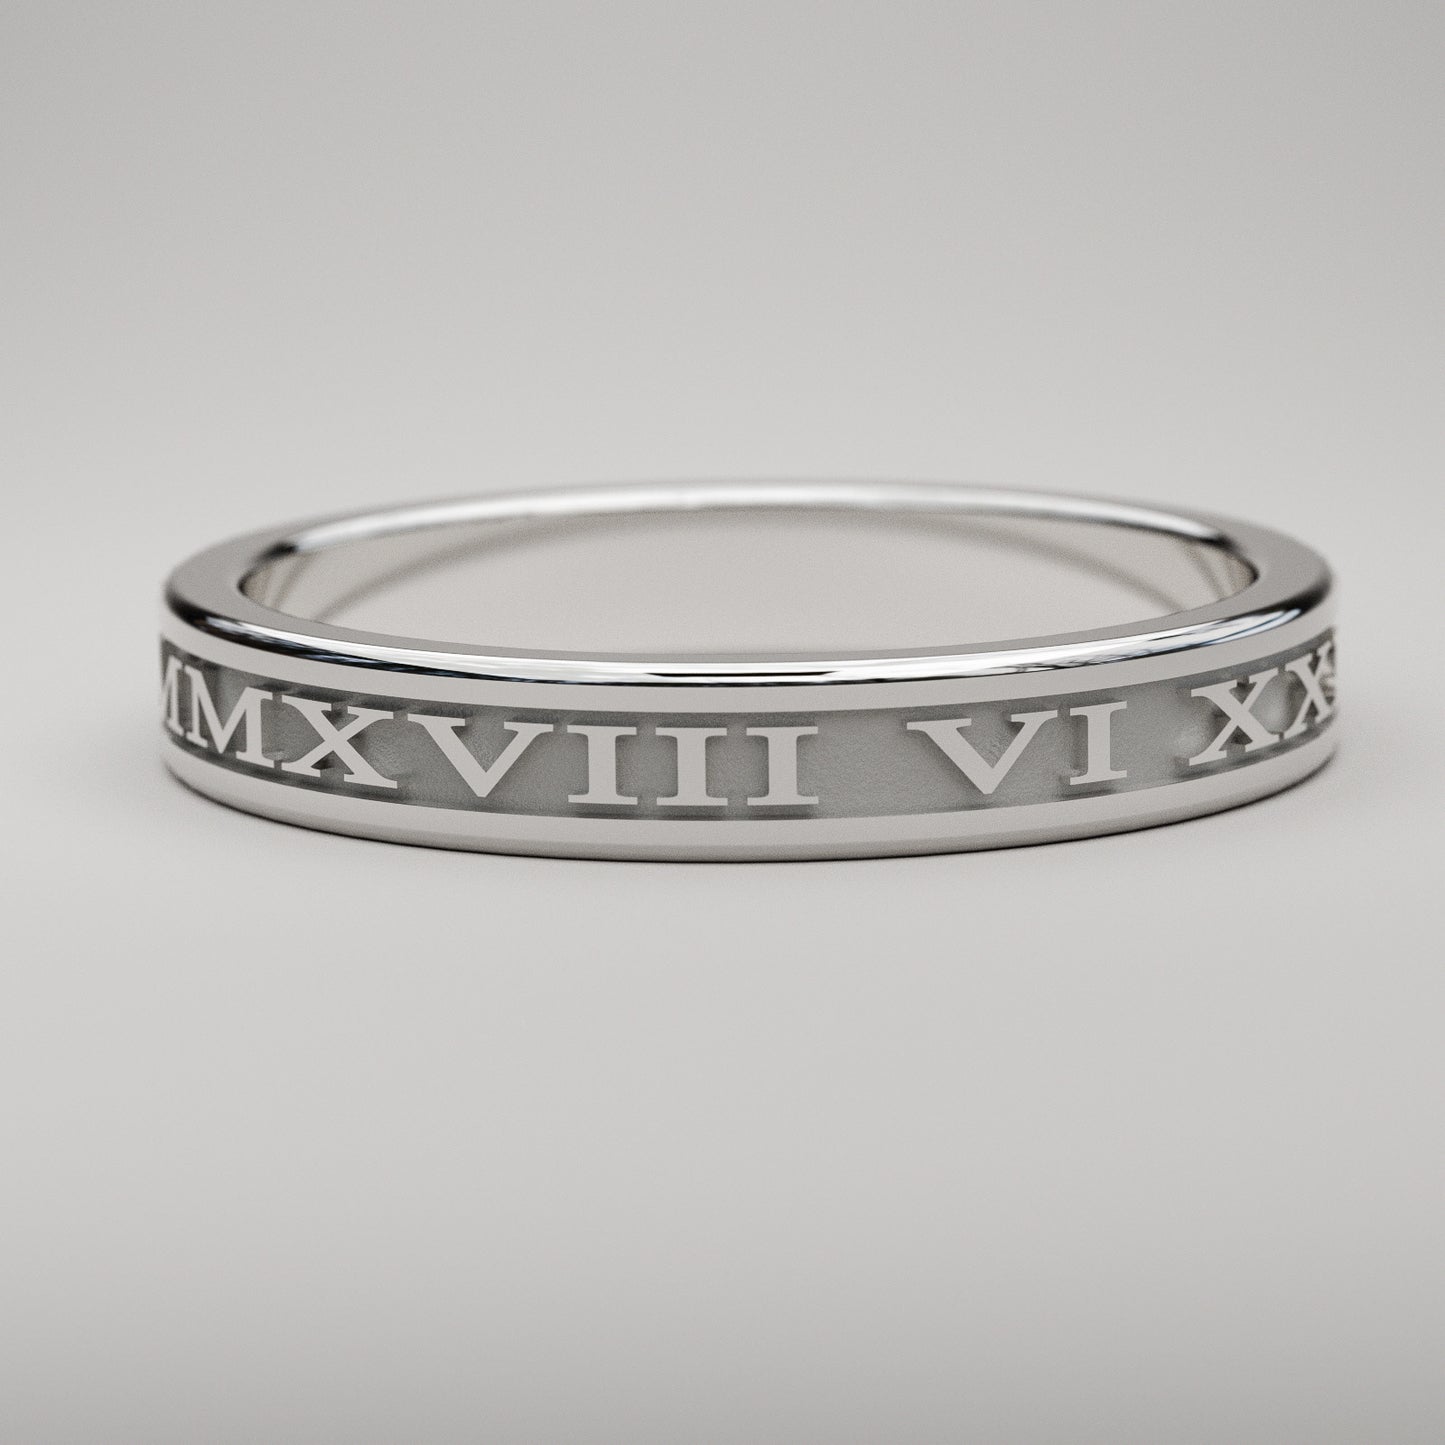 Custom date Roman Numeral ring in solid white gold, 3mm wide